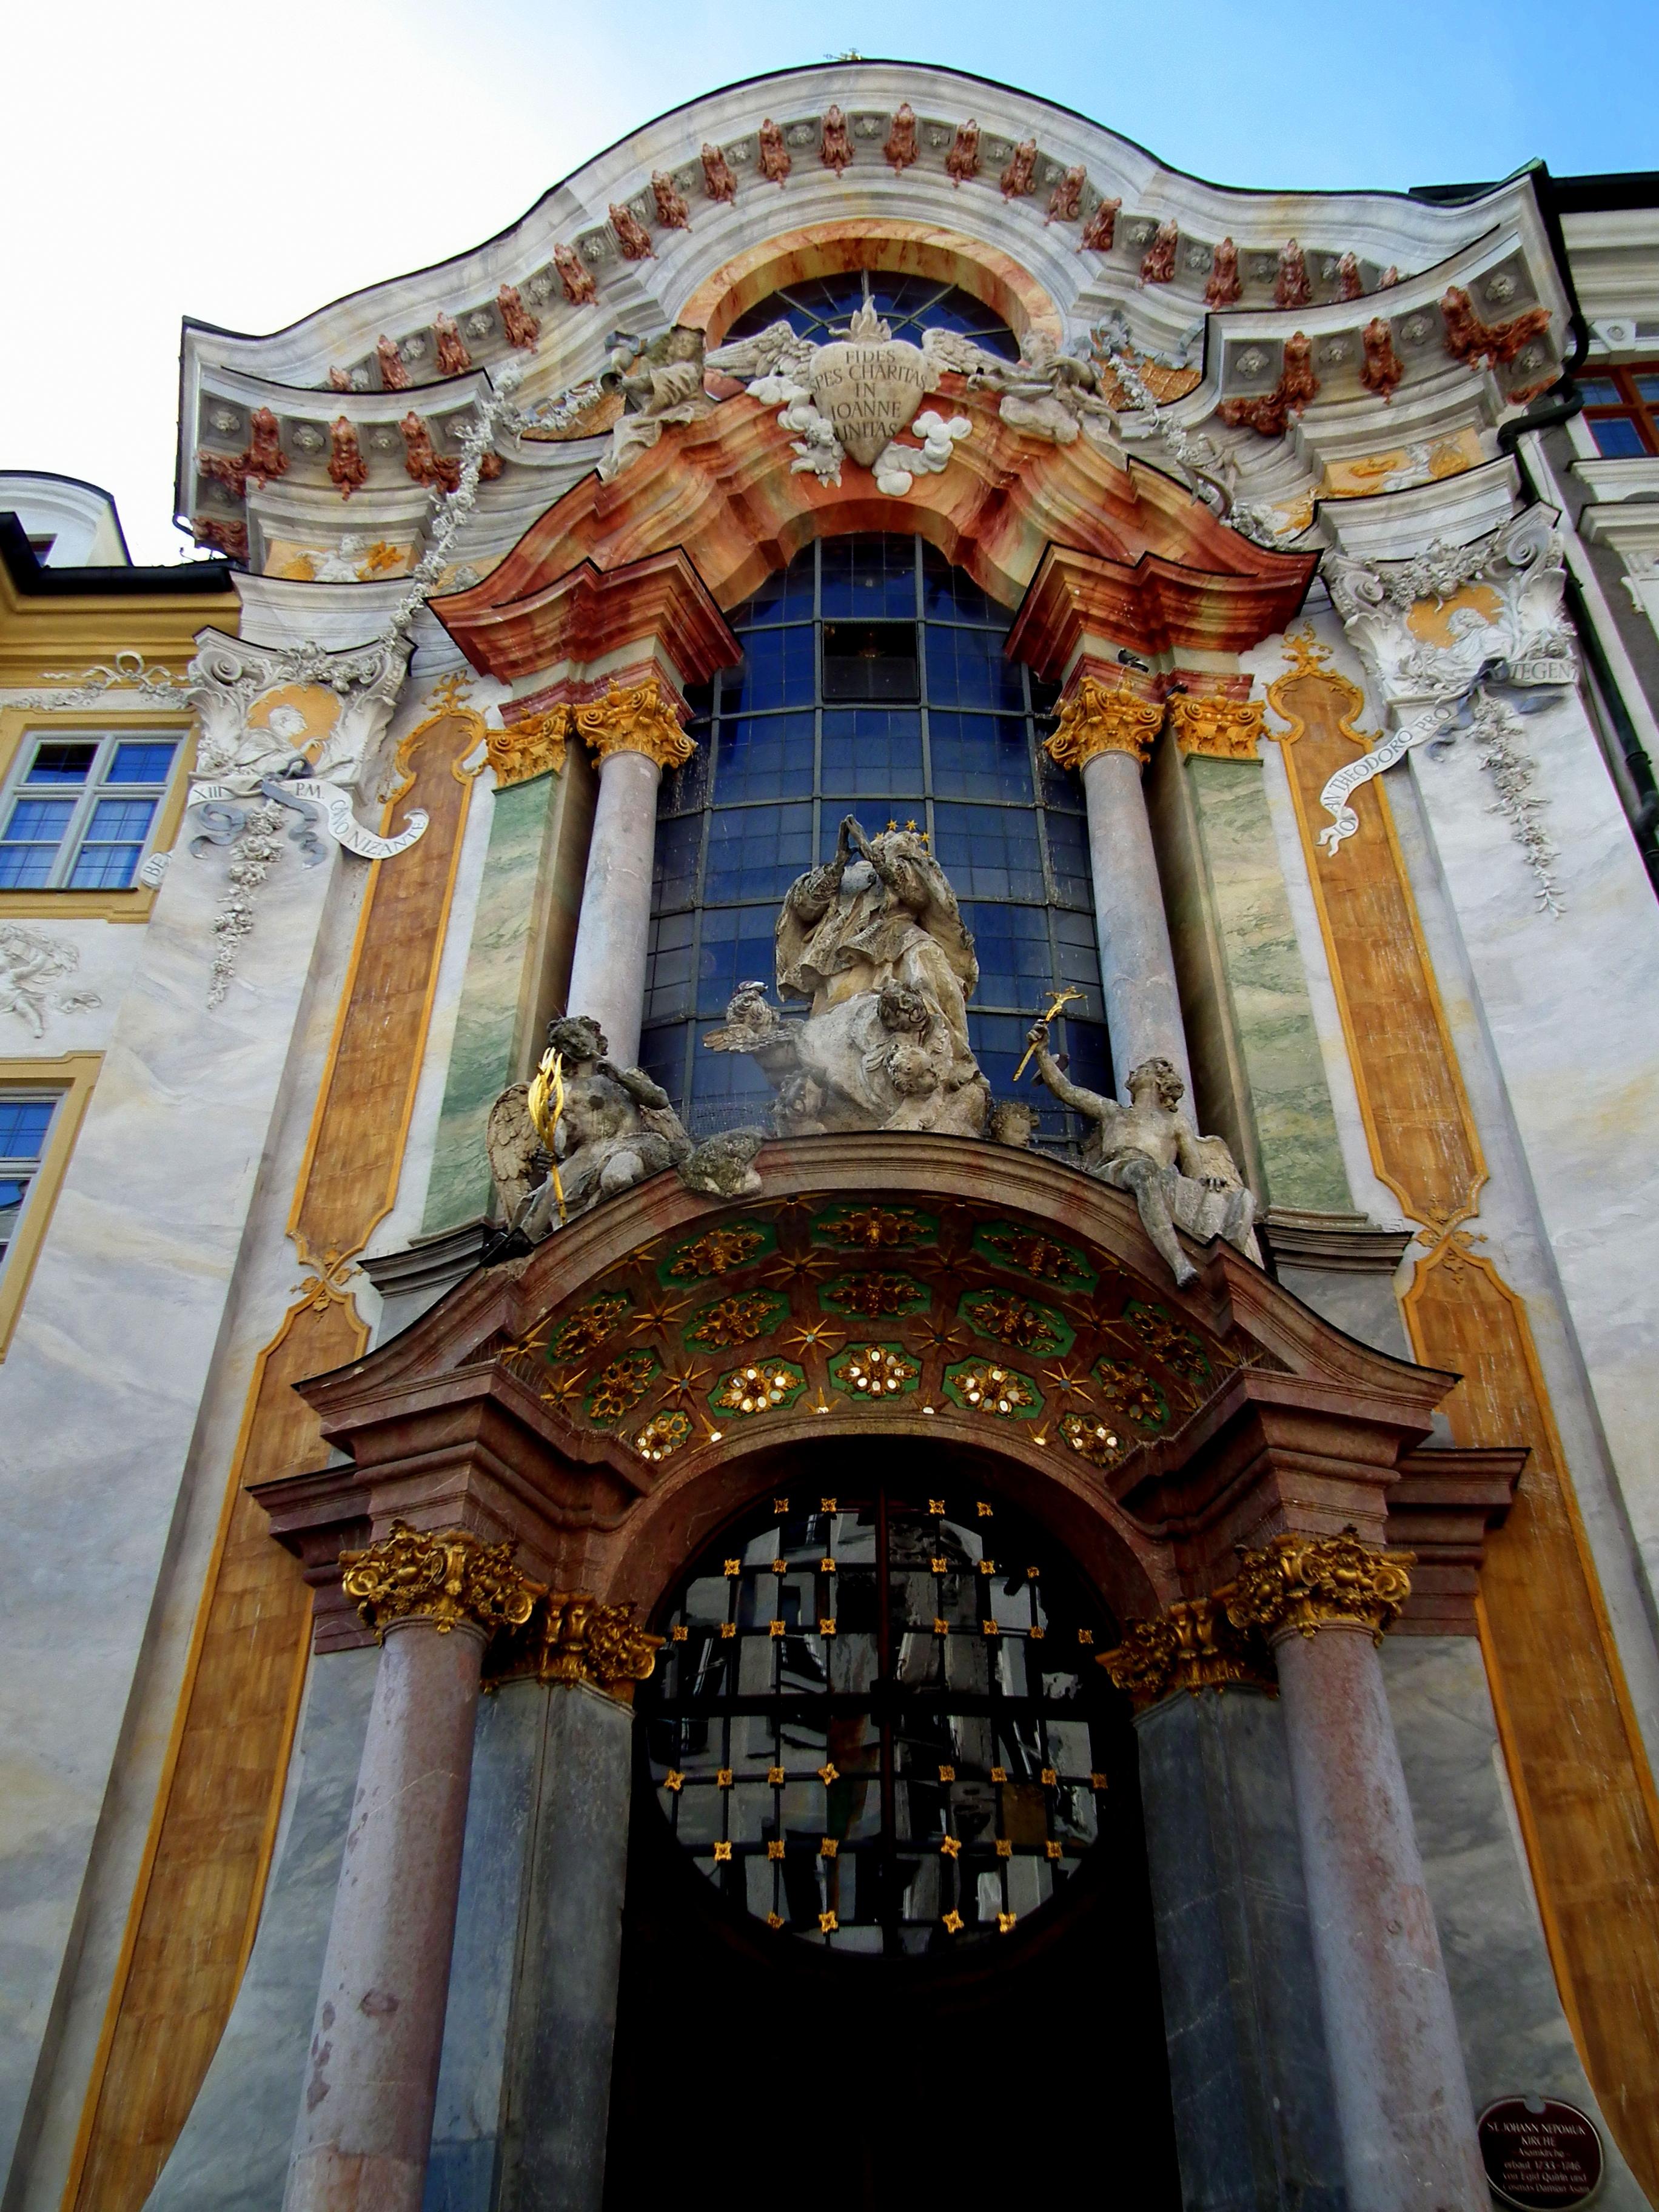 Cover image of this place Asamkirche